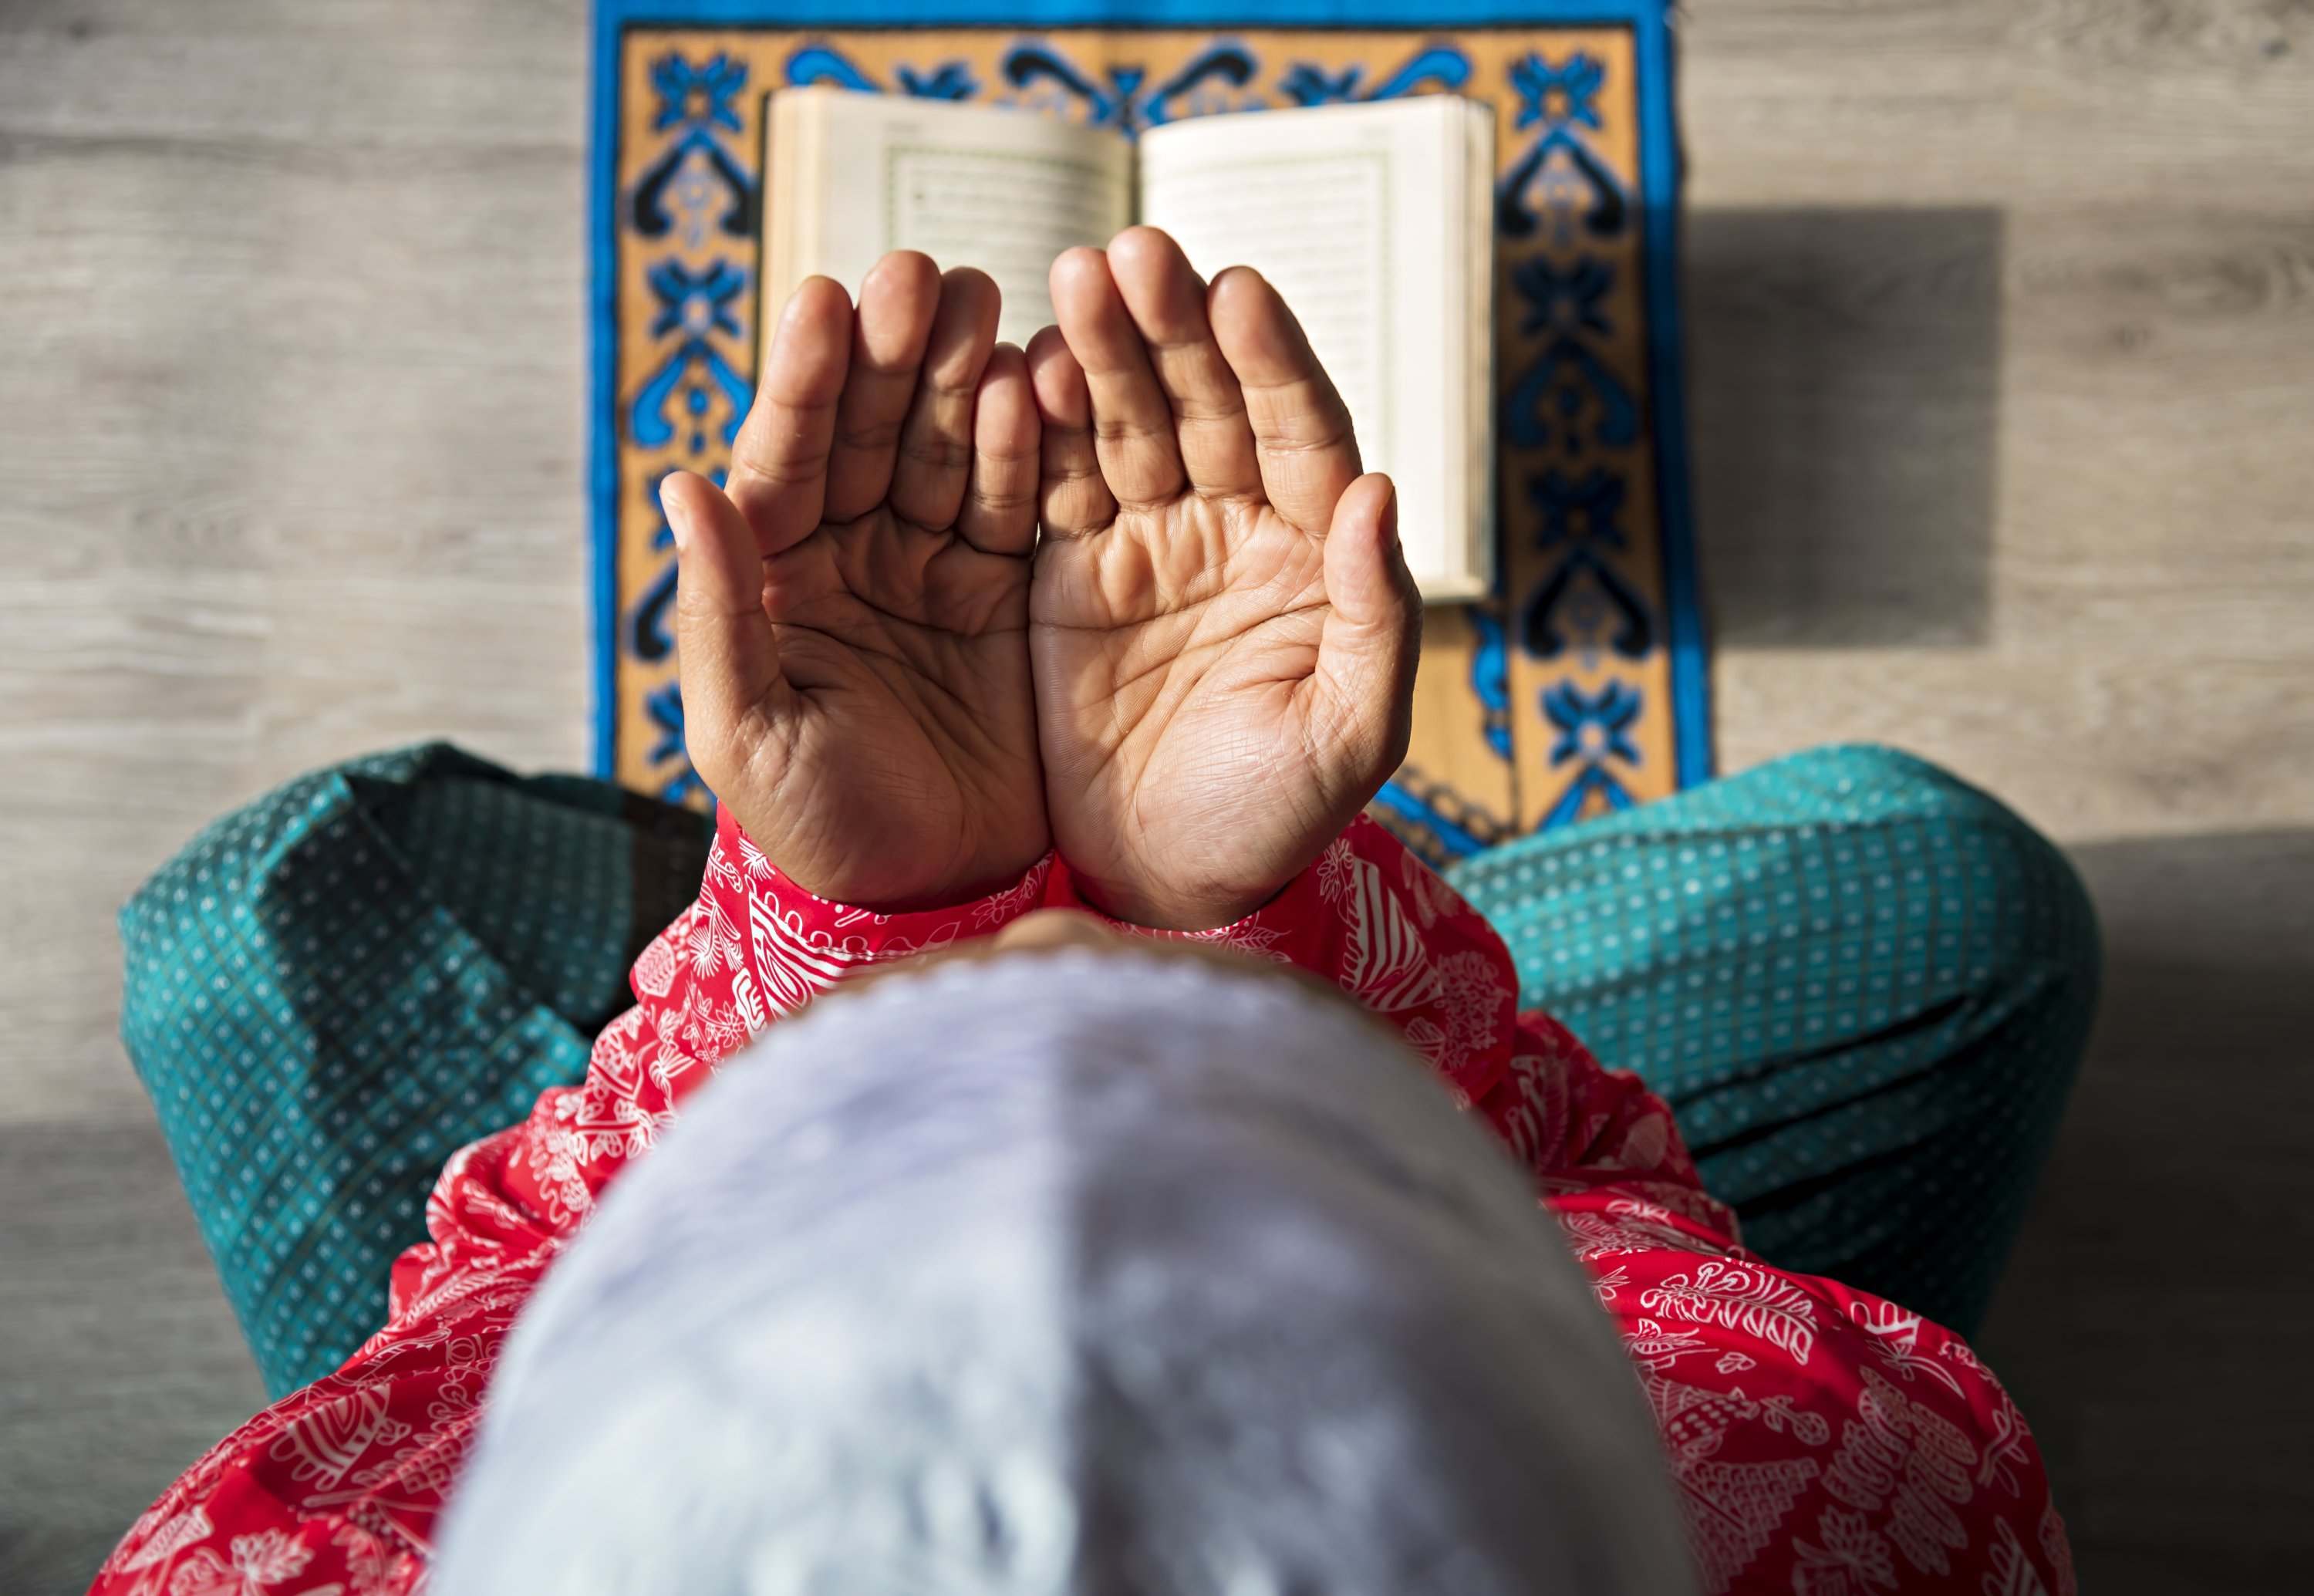 What does Islam promise to non-believers?